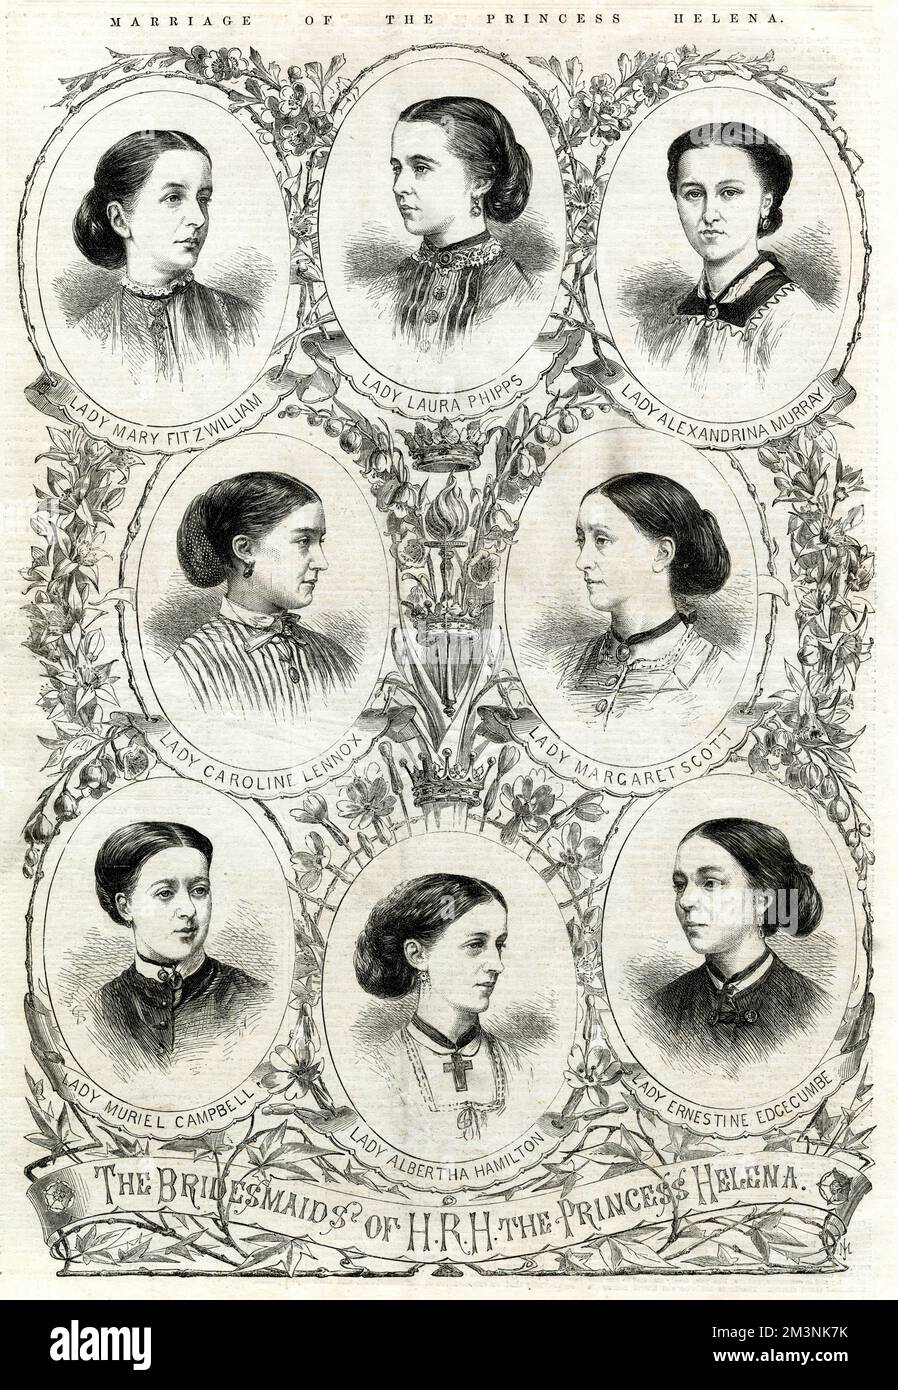 The eight bridesmaids in attendance at Princess Helena's wedding to Prince Christian of Schleswig-Holstein on the 5th July 1866. Clockwise from top left: 1. Lady Mary Fitzwilliam; 2. Lady Laura Phipps; 3. Lady Alexandrina Murray; 4. Lady Caroline Lennox; 5. Lady Margaret Scott; 6. Lady Muriel Campbell; 7. Lady Albertha Hamilton; 8. Lady Ernestine Edgecumbe.     Date: 1866 Stock Photo